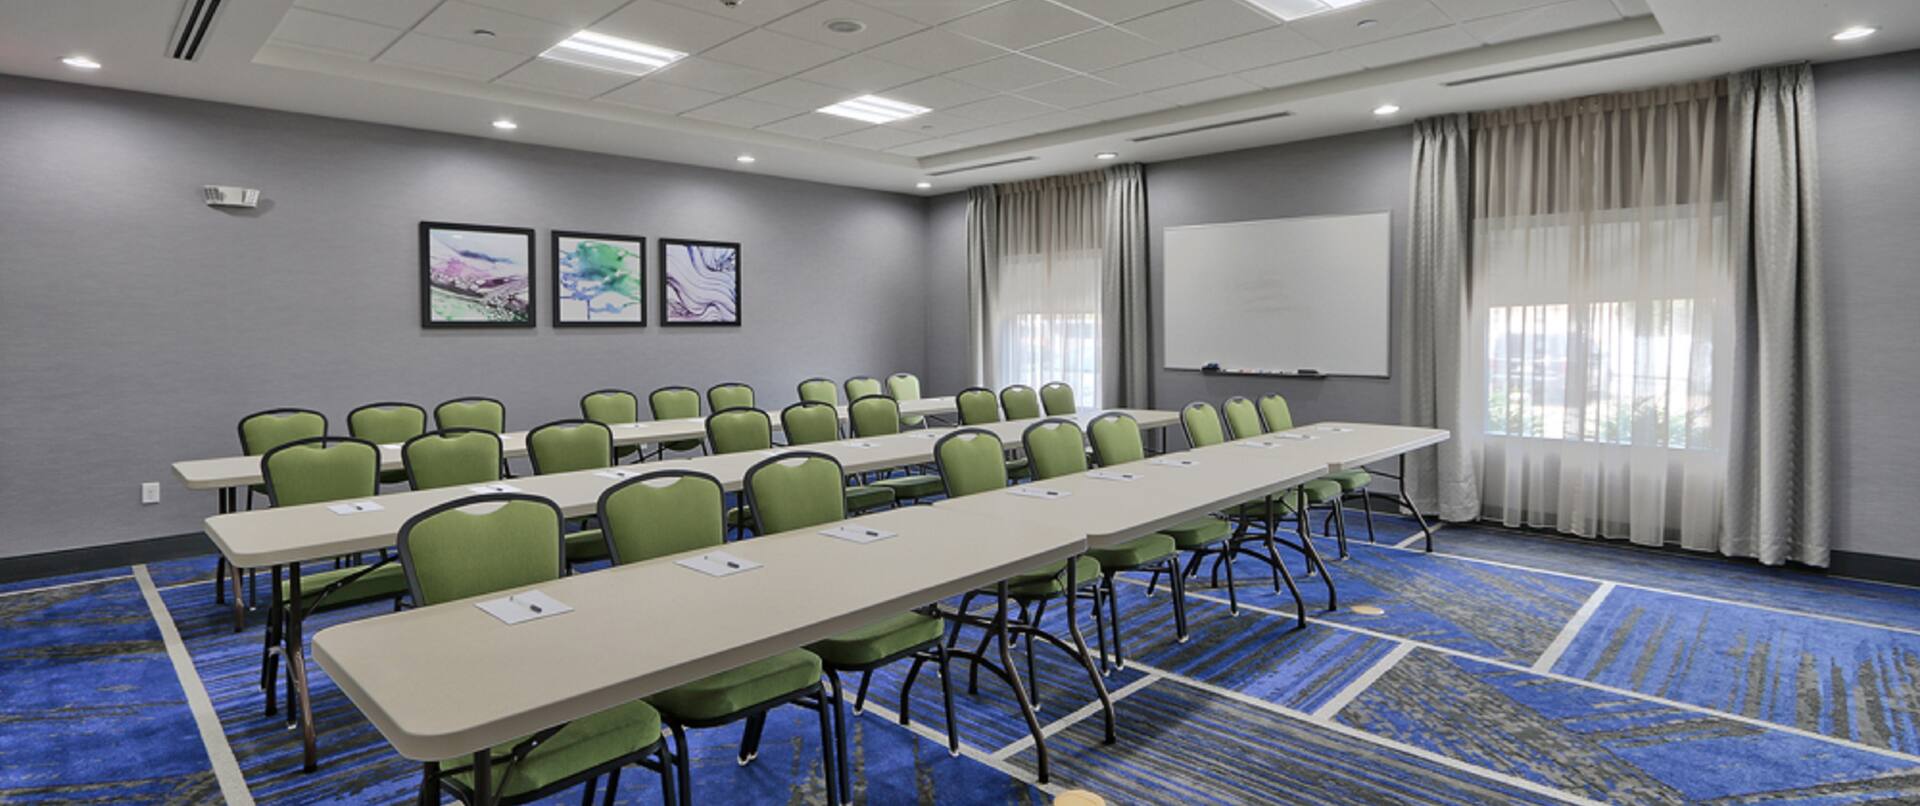 View of Meeting Room from Front of Room with Seats for 27 People, Whiteboard and Windows